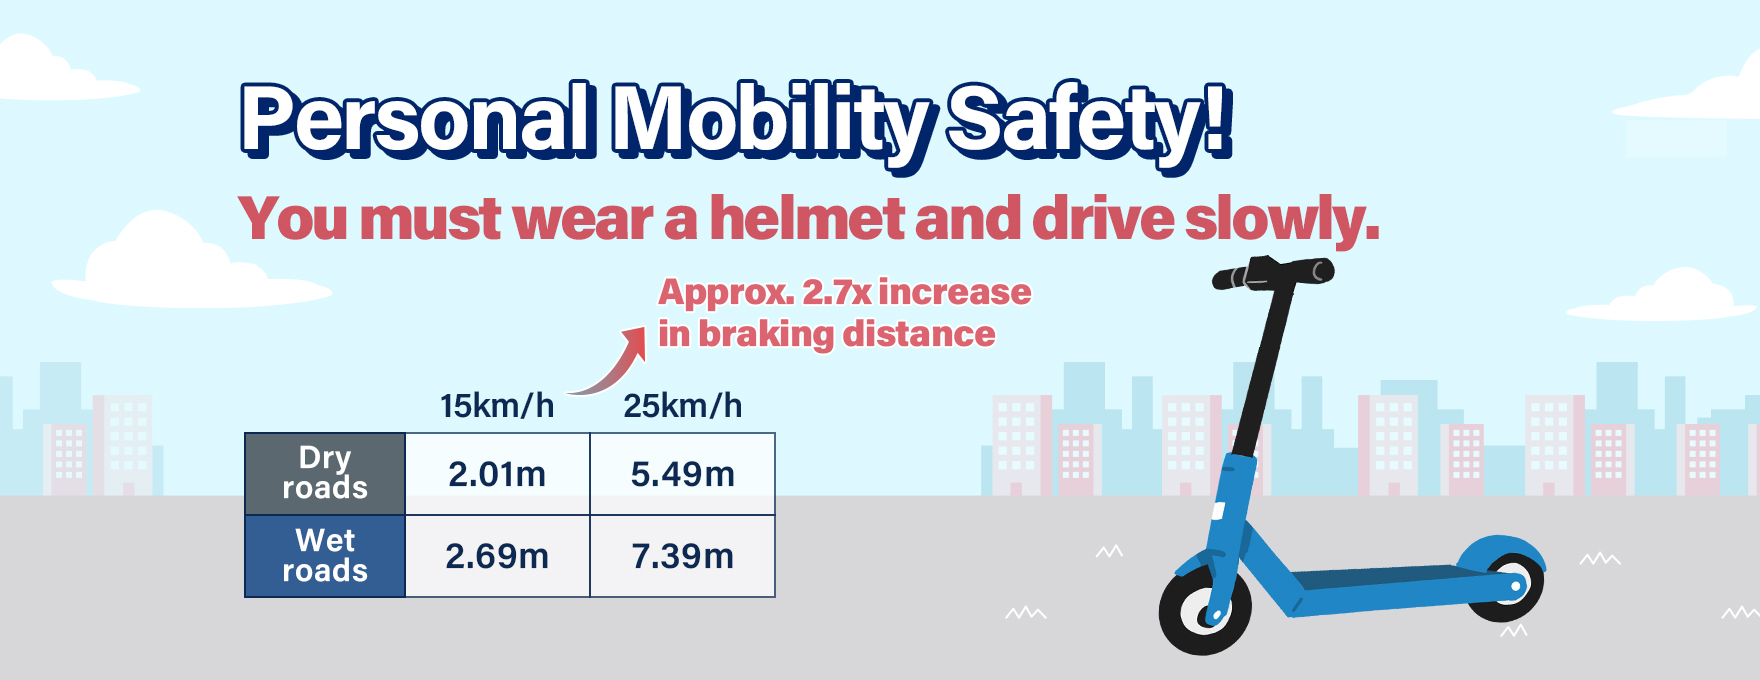 Personal Mobility safety! You must wear a helmet and drive slowly.